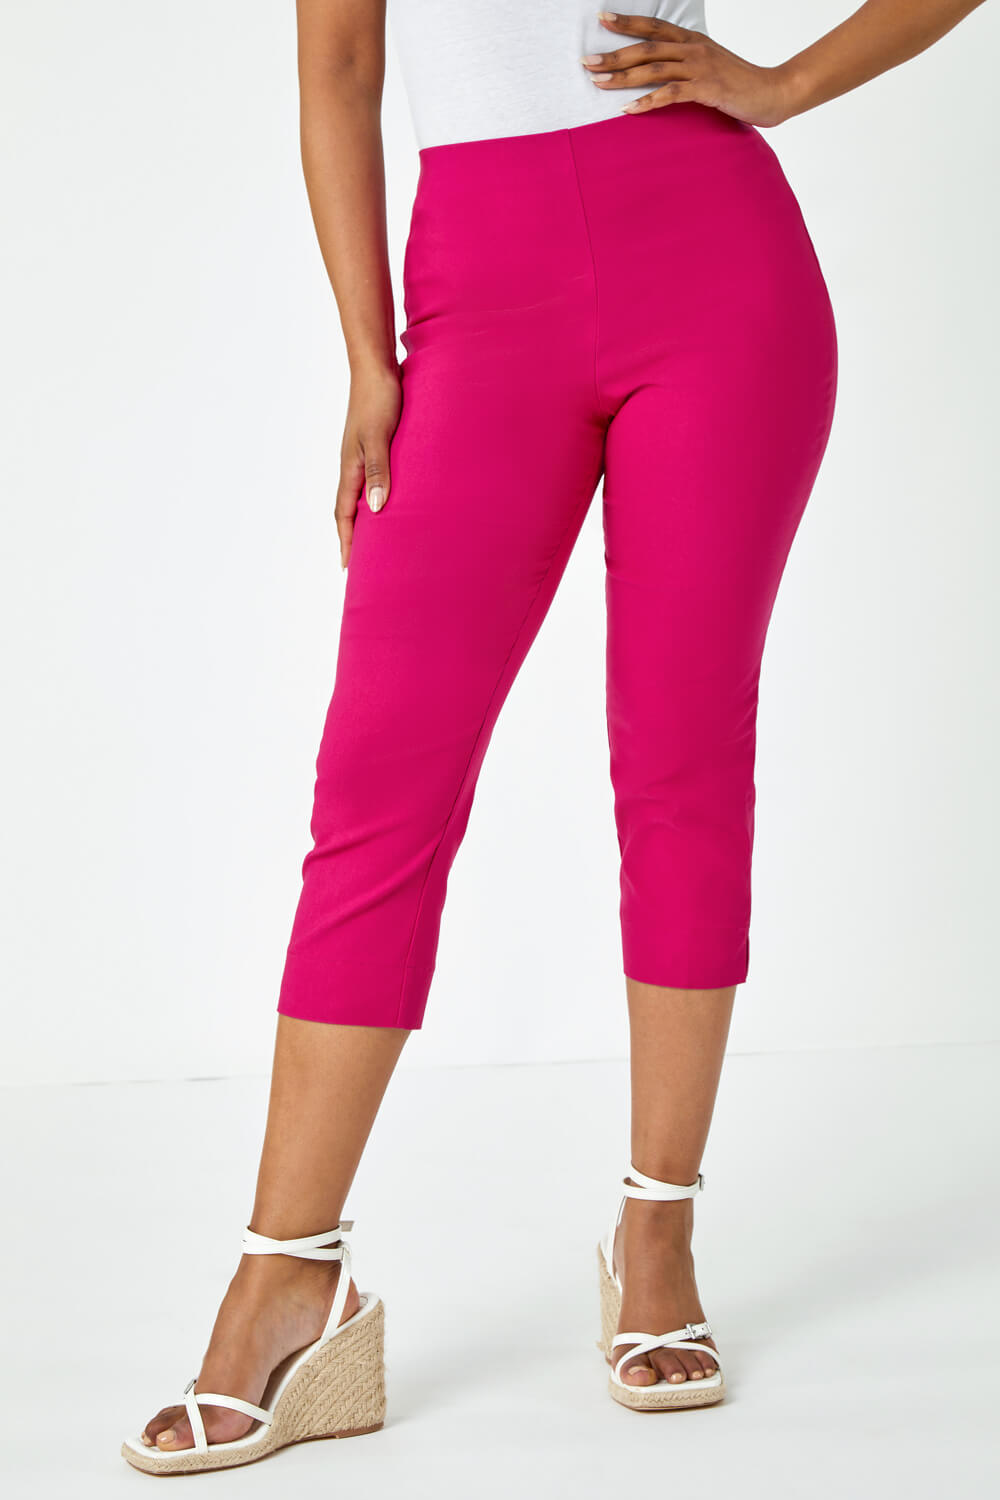 CERISE Petite Cropped Stretch Trouser, Image 2 of 5